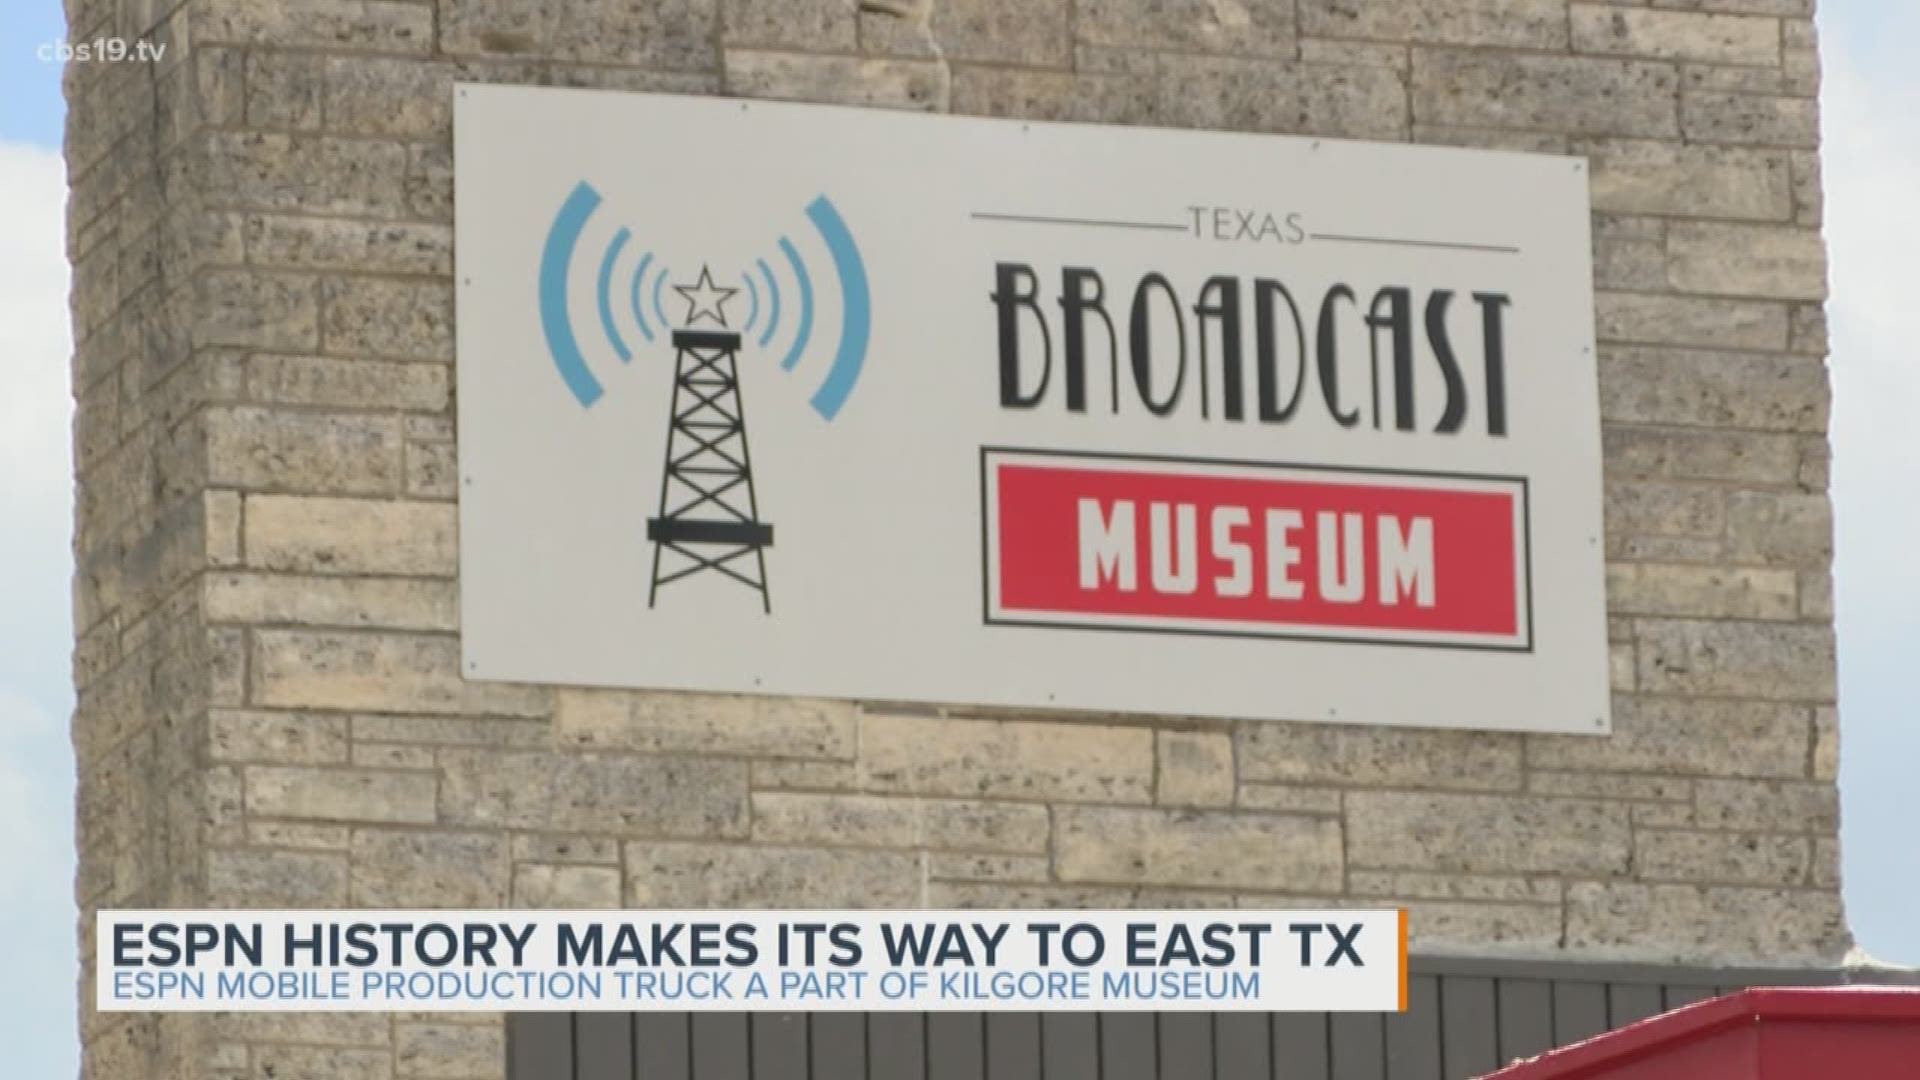 One of ESPN's original mobile production trucks is now part of the Texas Museum of Broadcast and Communications in Kilgore. CBS19 Photojournalist Alan Kasper explains.